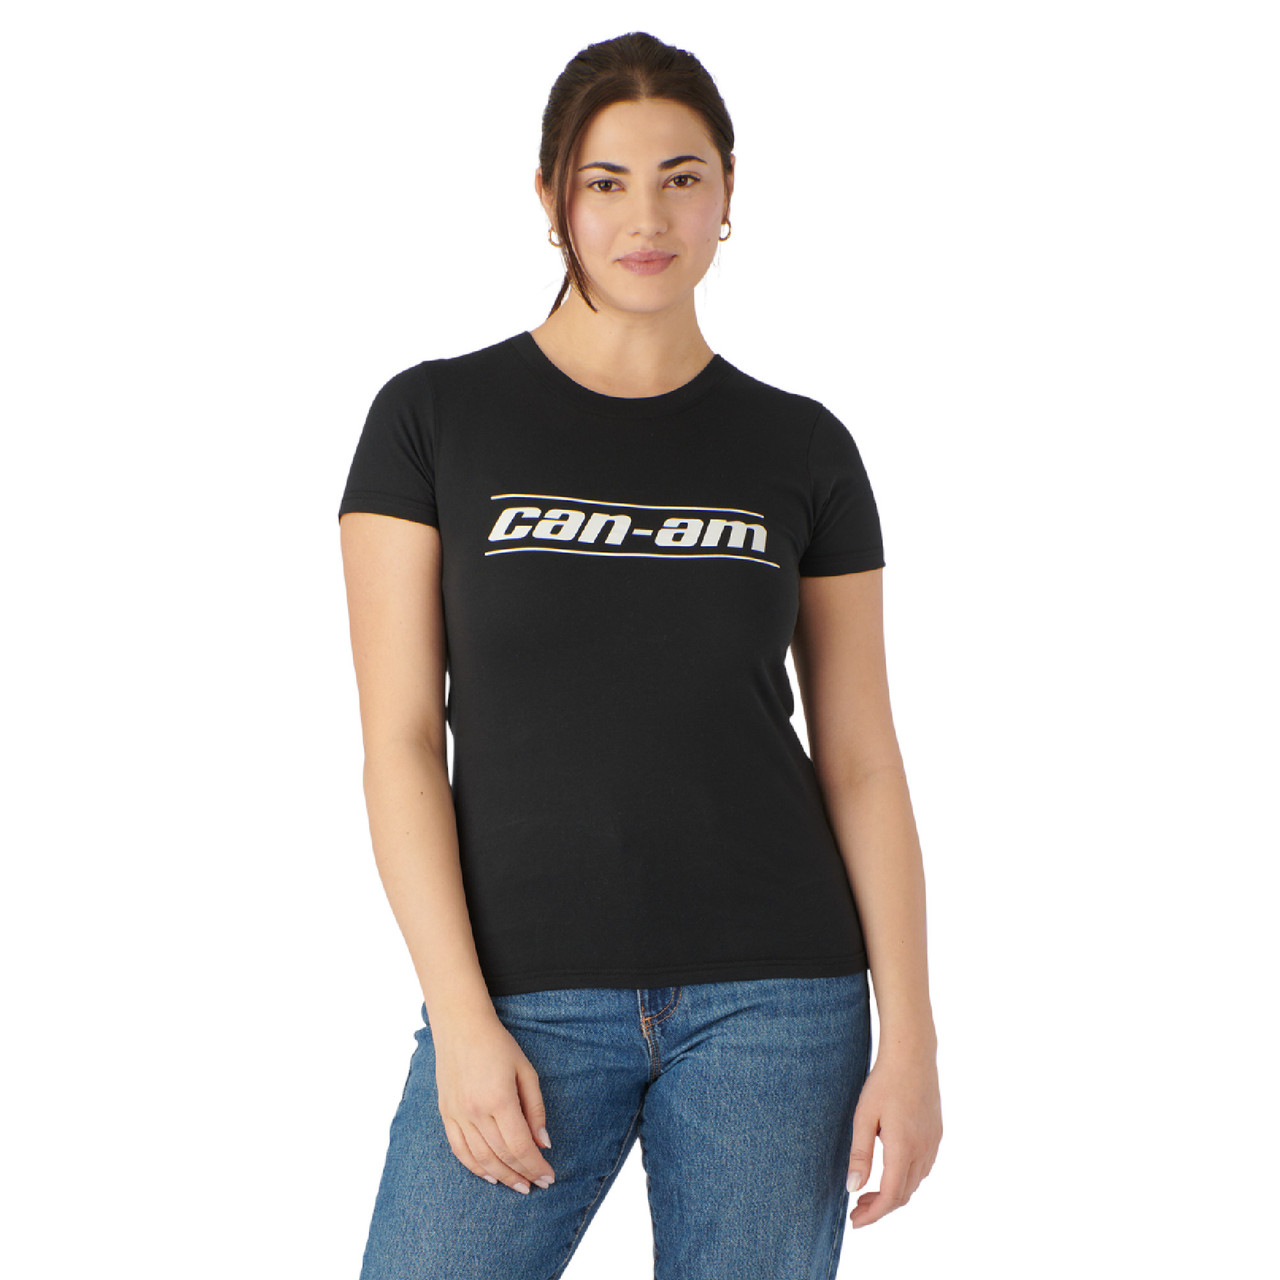 Can-Am New OEM, Women's XL Cotton Polyester Signature T-shirt, 4547531290